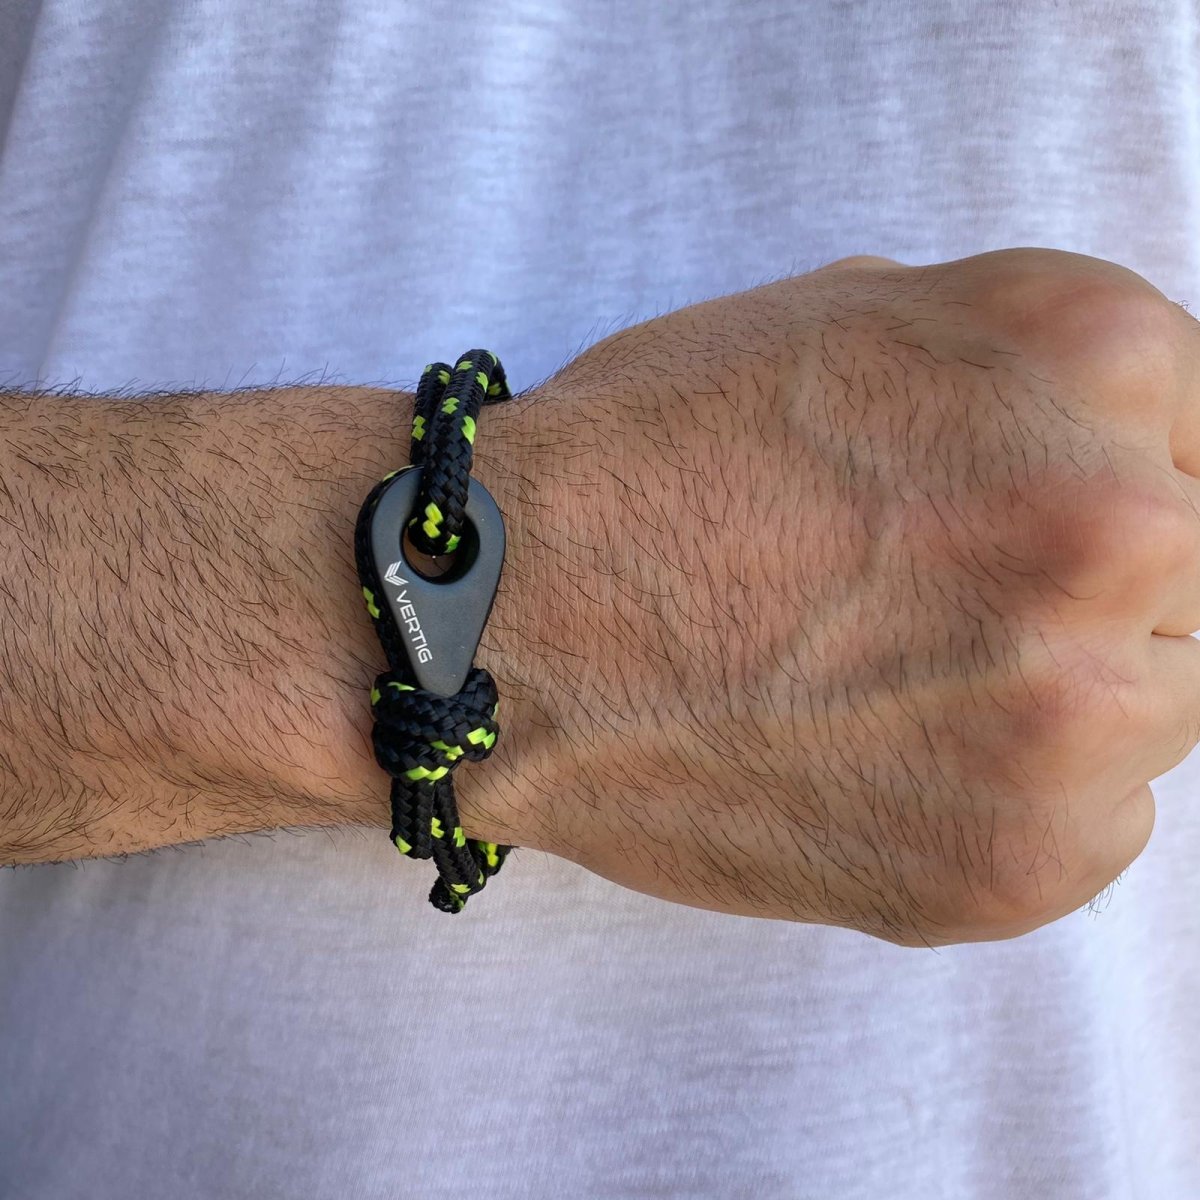 How To Make An Adustable Paracord Rastaclat Friendship Bracelet With Sliding  Knot - Yo… | Paracord bracelets, Paracord bracelet patterns, Paracord  bracelet tutorial